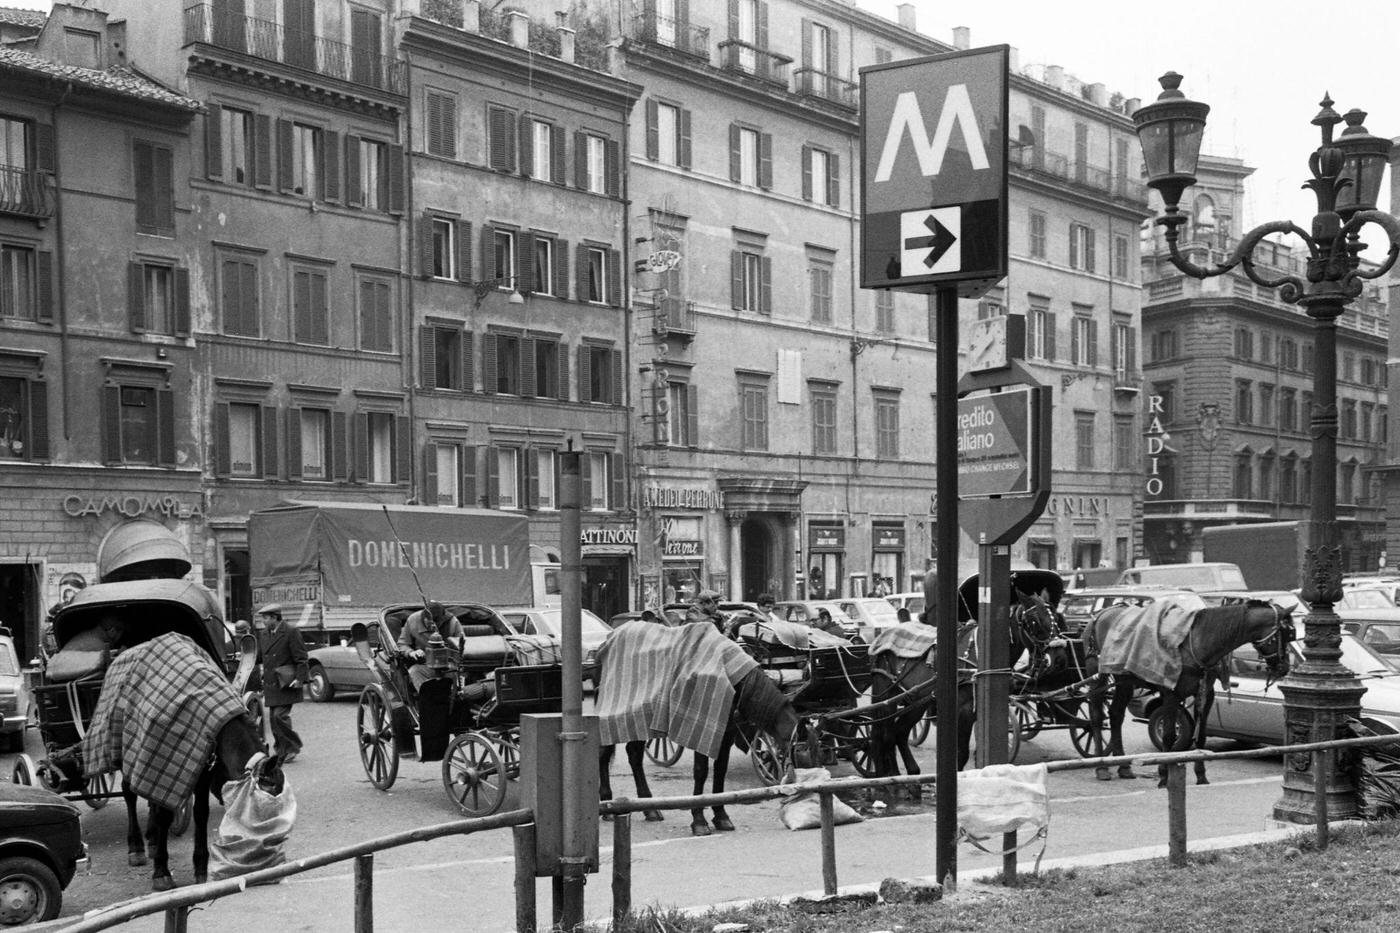 Horse-Drawn Carriages Near Rome Metro Entrance, 1980